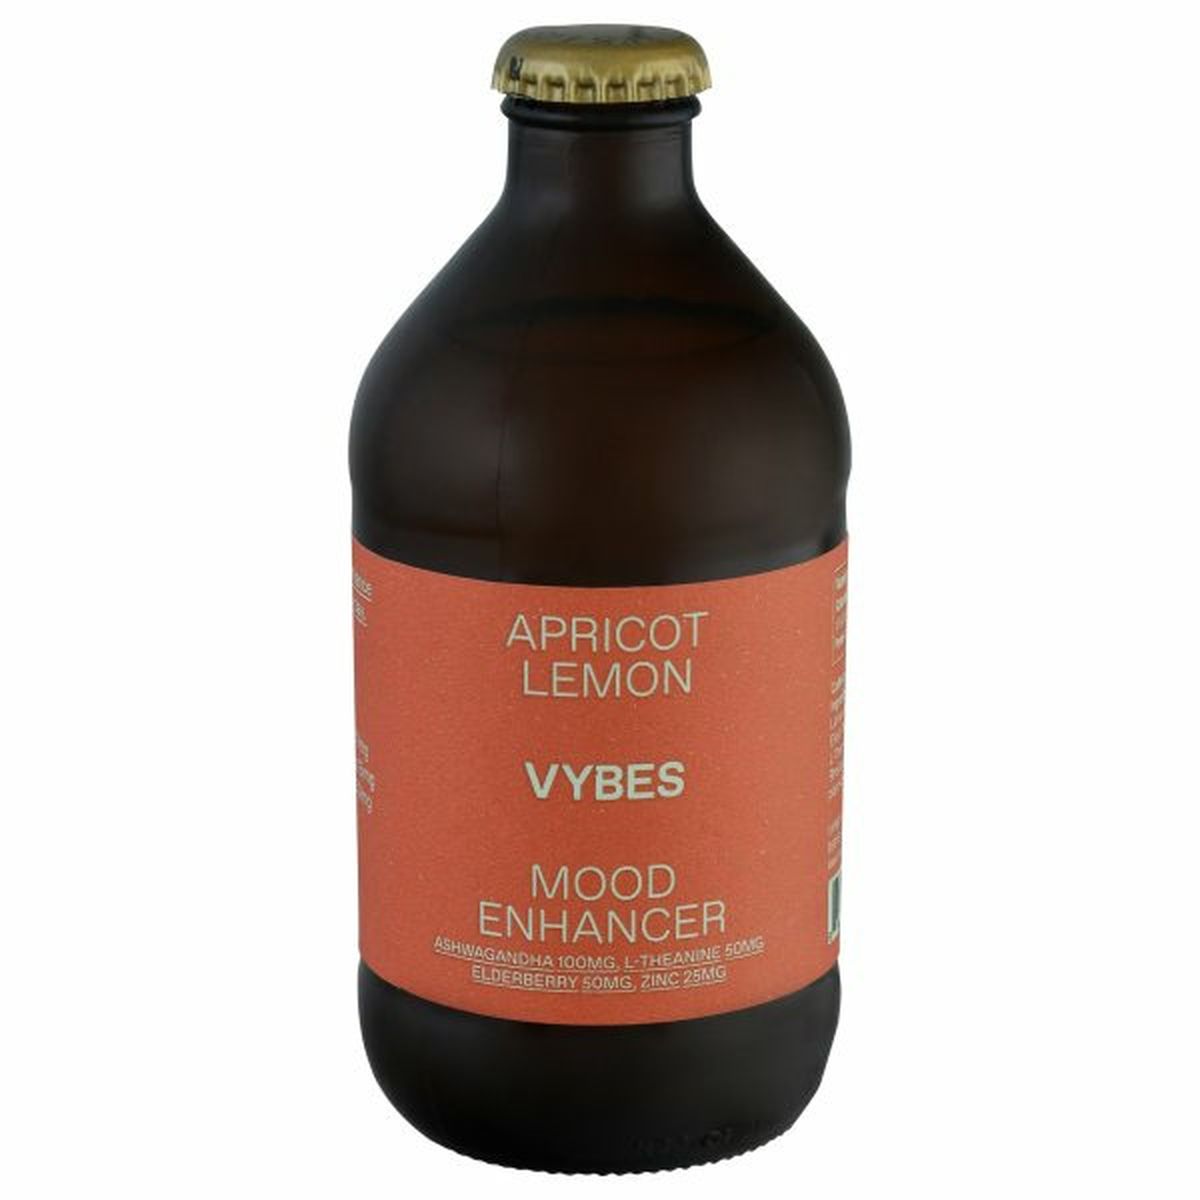 Calories in Vybes Mood Enhancer, Apricot Lemon